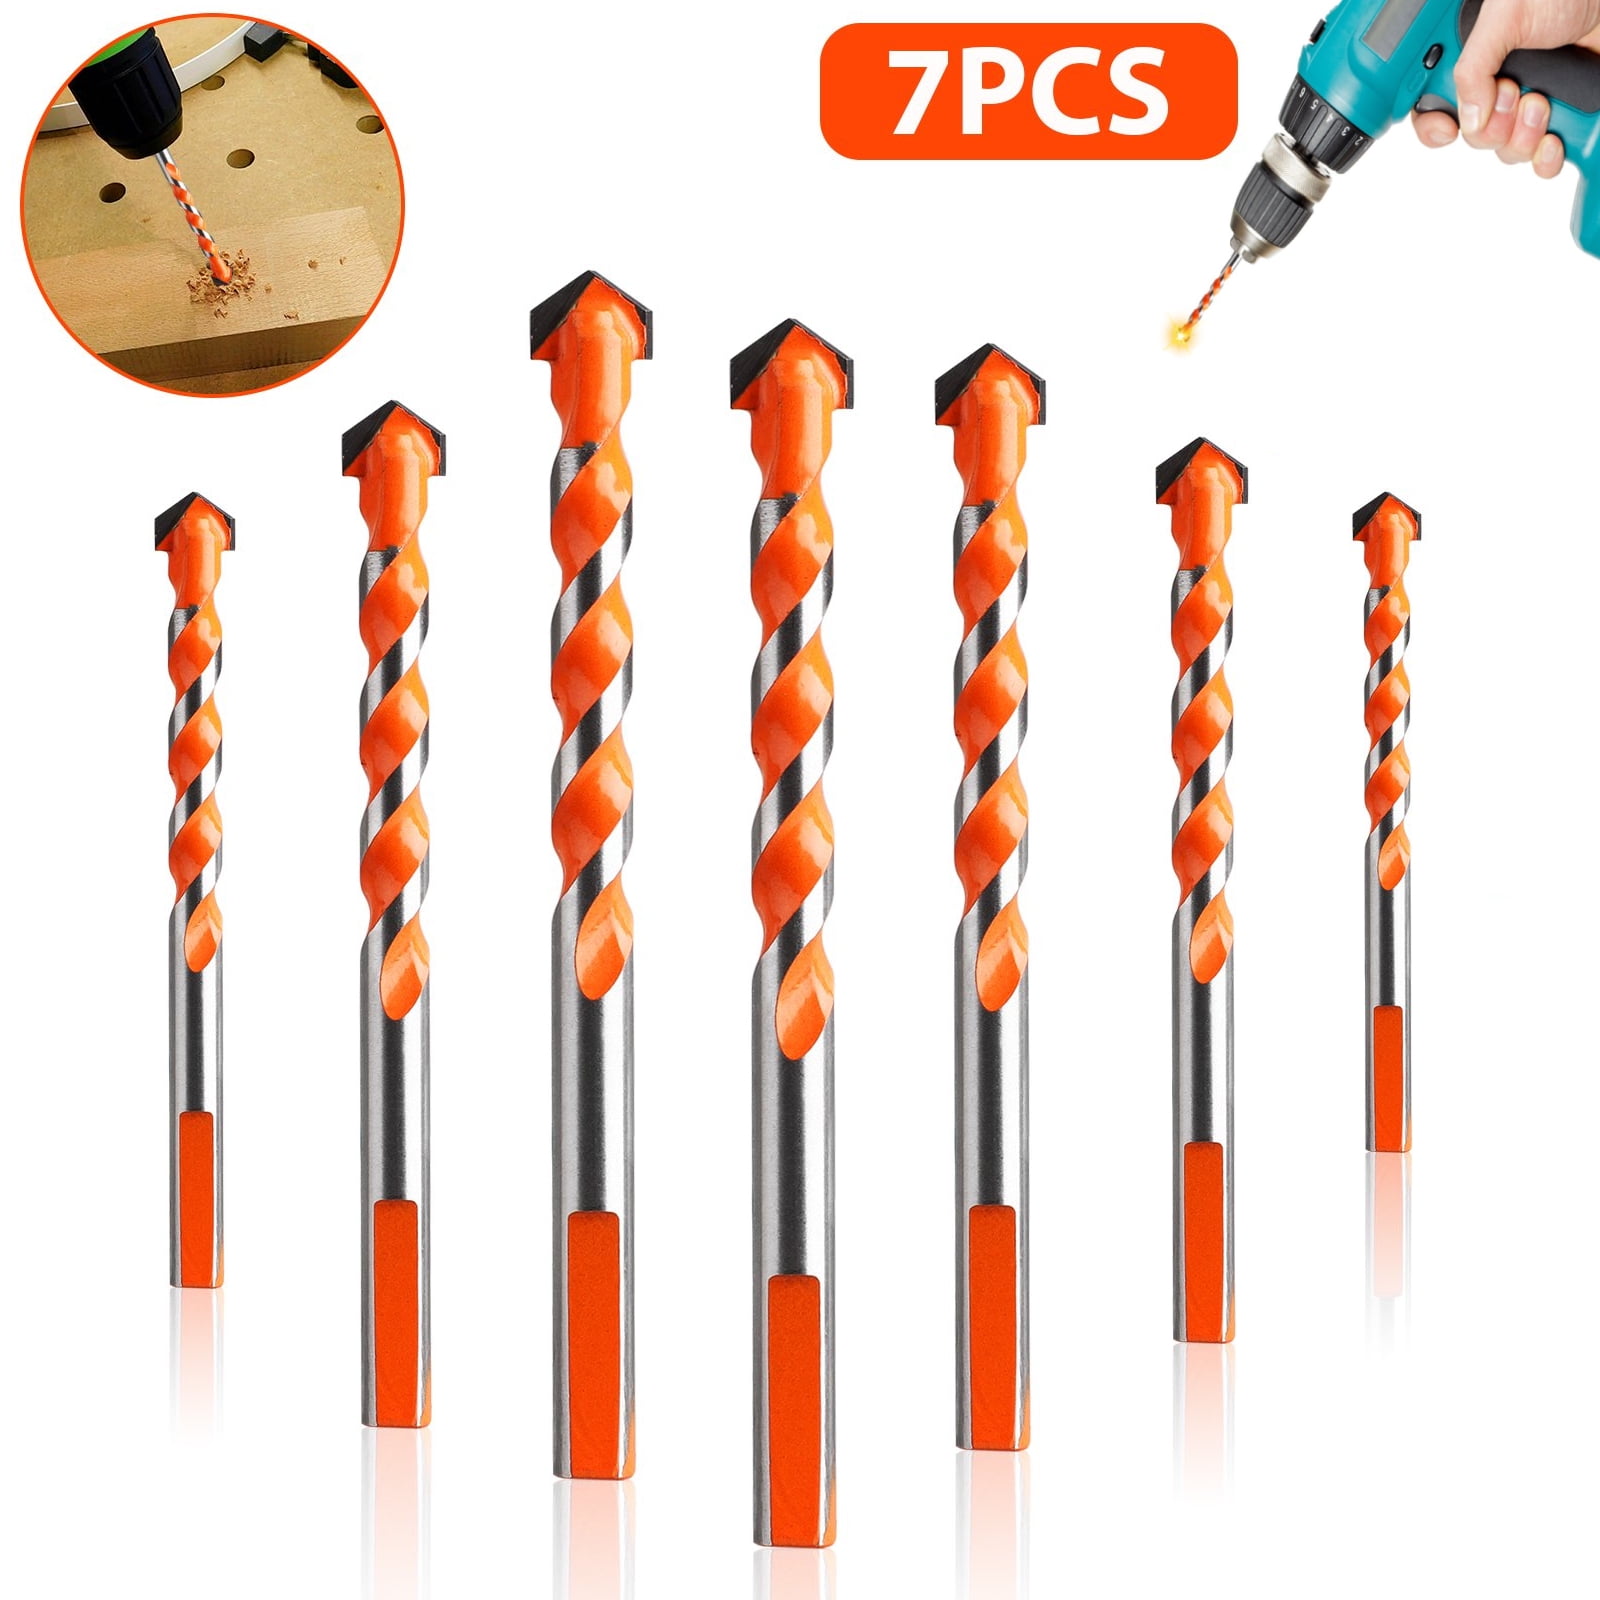 1/8” to 1/2” Concrete Drill Bit Set with Triangle Handle for Tile Tungsten Carbide Tip Work with Ceramic Tile 7 Pcs Masonry Drill Bits Wall Mirror Glass Brick Plastic and Wood 